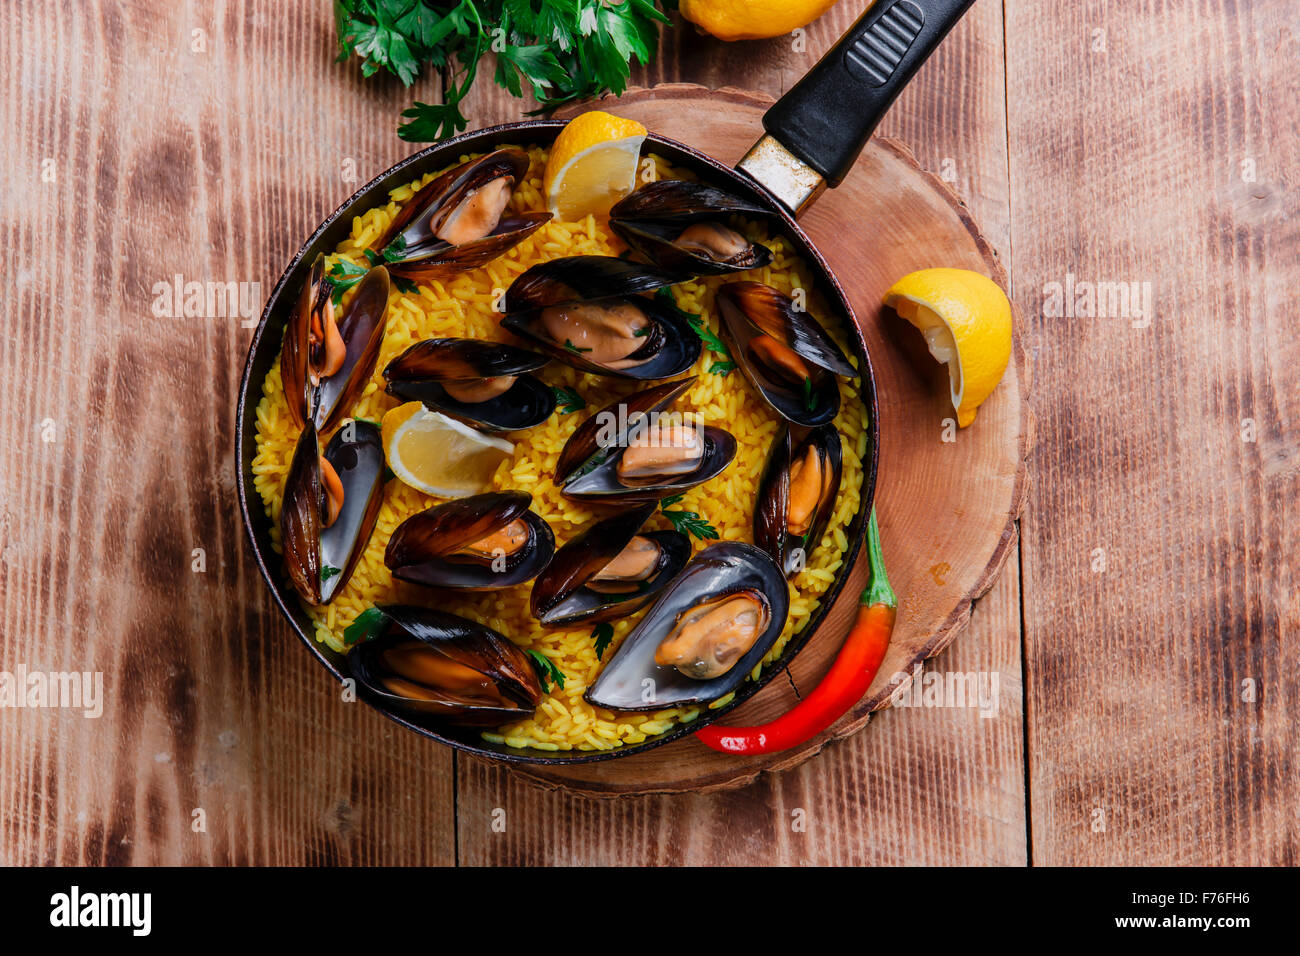 mussel paella rice in a frying pan Stock Photo